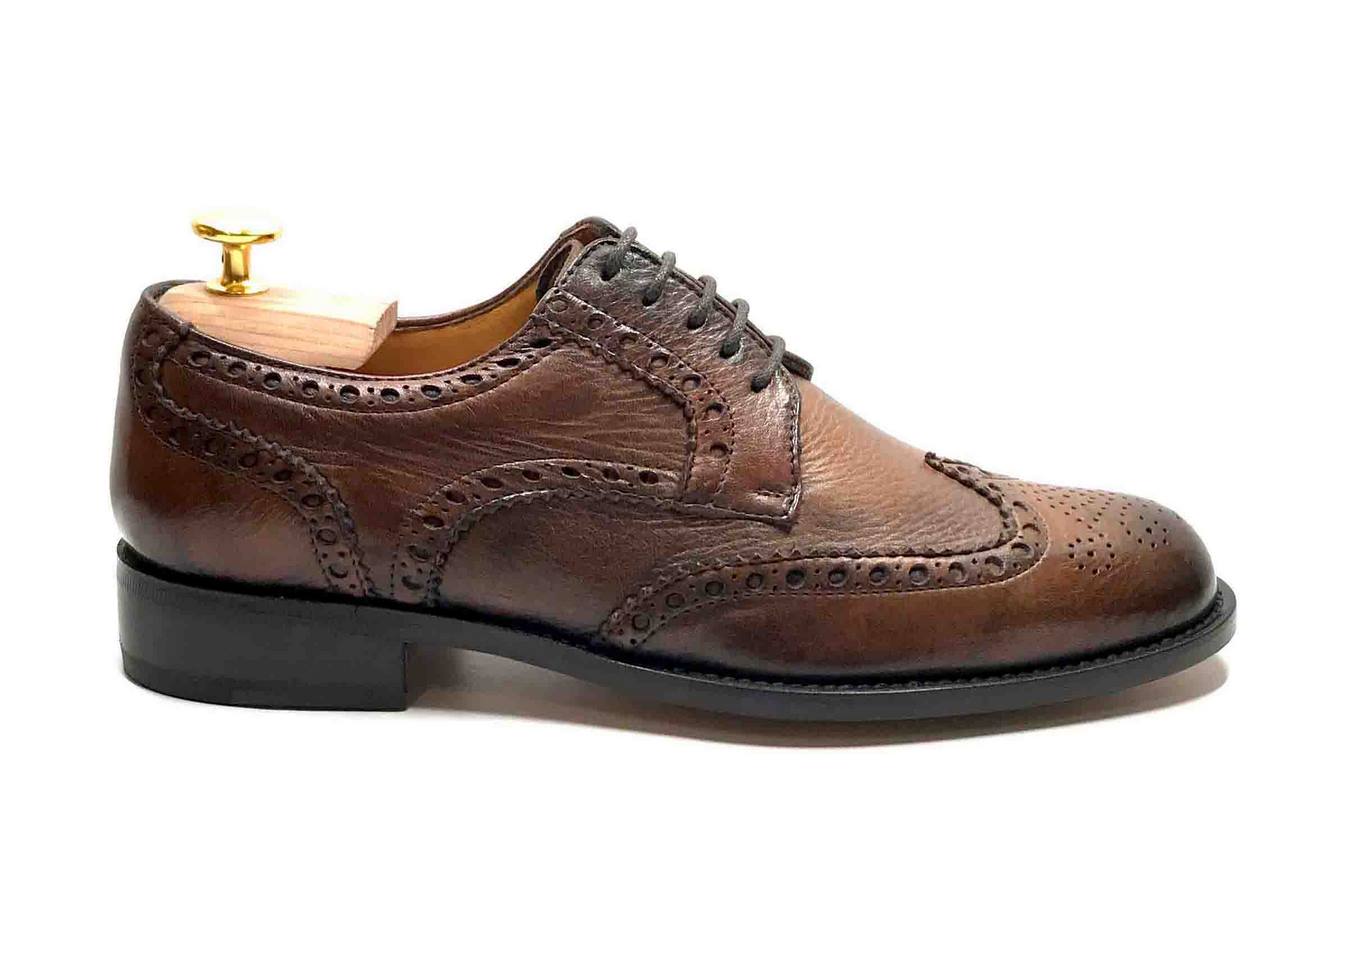 Comfort Laced with removable insoles in Brown Canadian moose leather